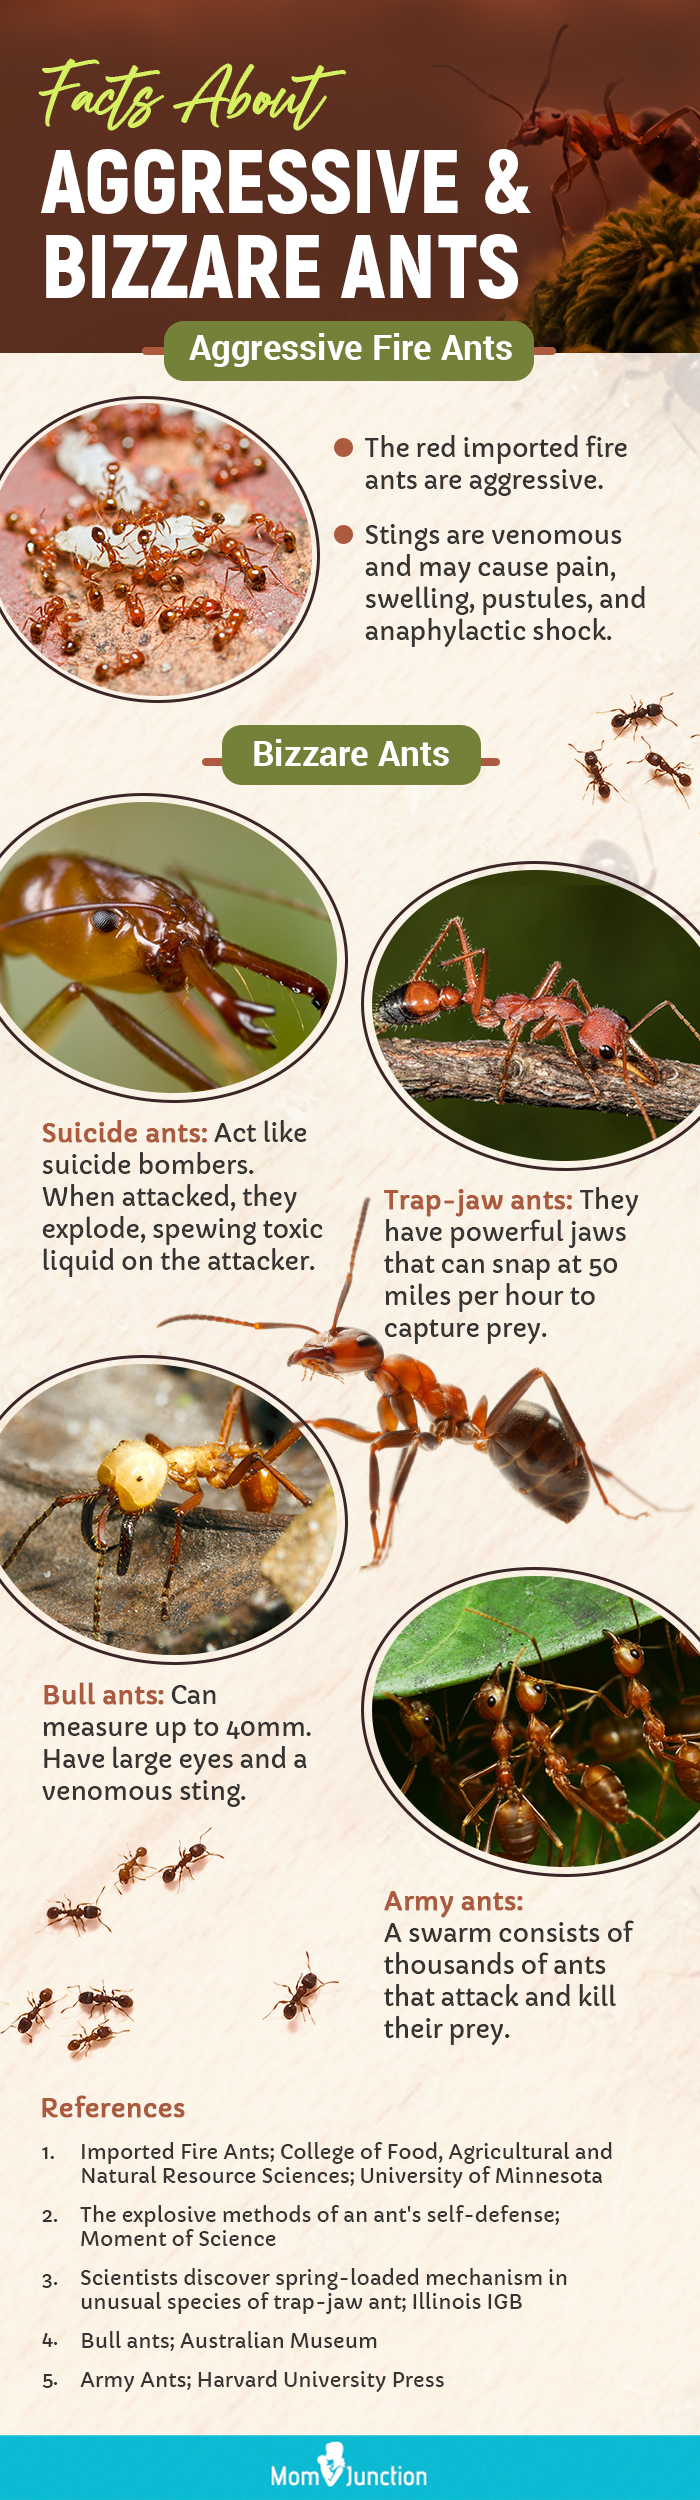 facts about aggressive and bizzare ants (infographic)